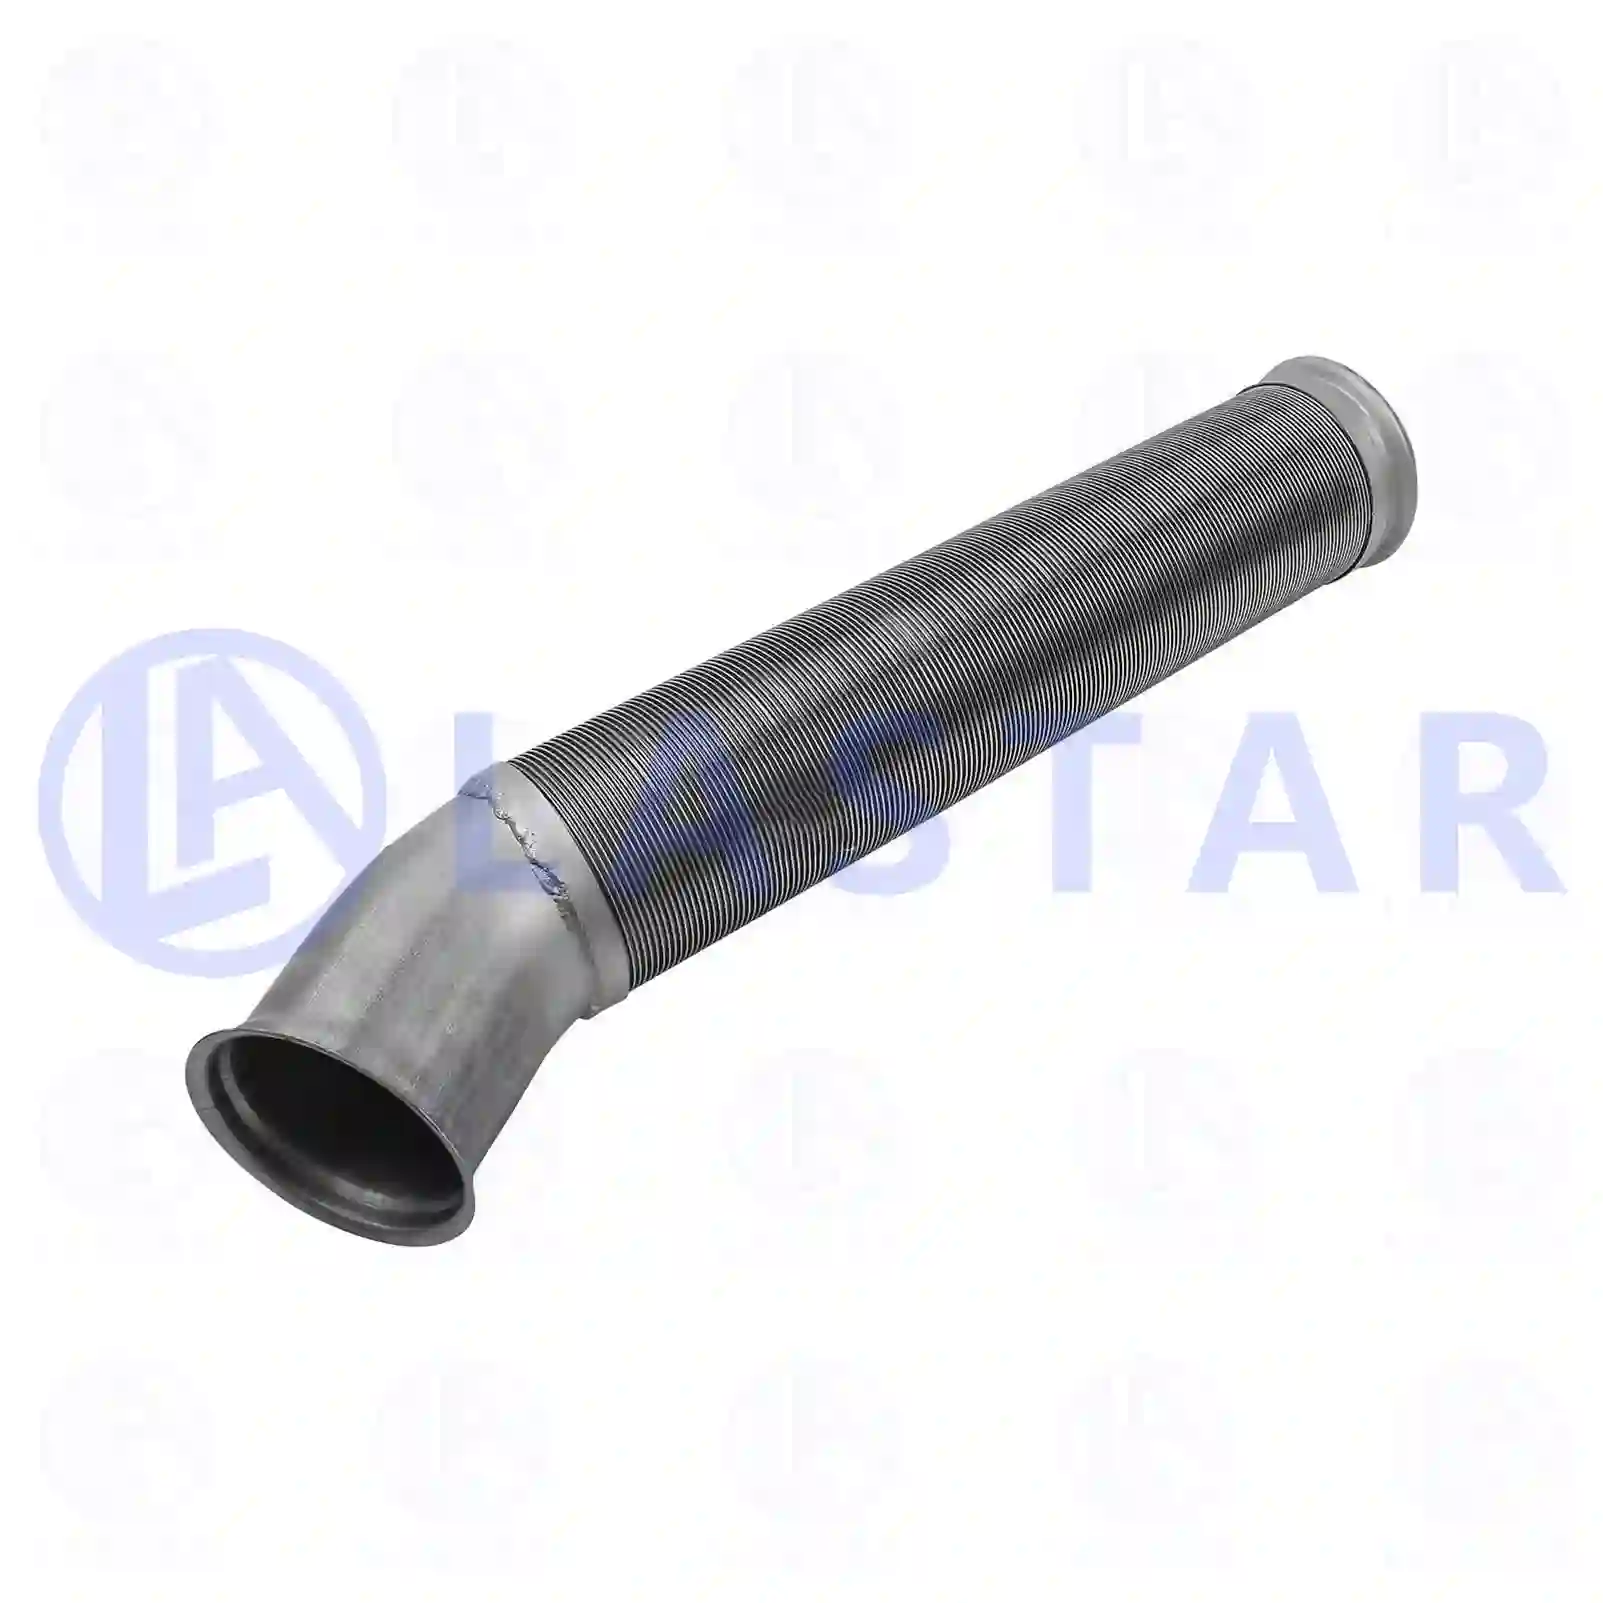 Exhaust pipe, 77706499, 1634456, 1643463, 1743073, ZG10303-0008 ||  77706499 Lastar Spare Part | Truck Spare Parts, Auotomotive Spare Parts Exhaust pipe, 77706499, 1634456, 1643463, 1743073, ZG10303-0008 ||  77706499 Lastar Spare Part | Truck Spare Parts, Auotomotive Spare Parts